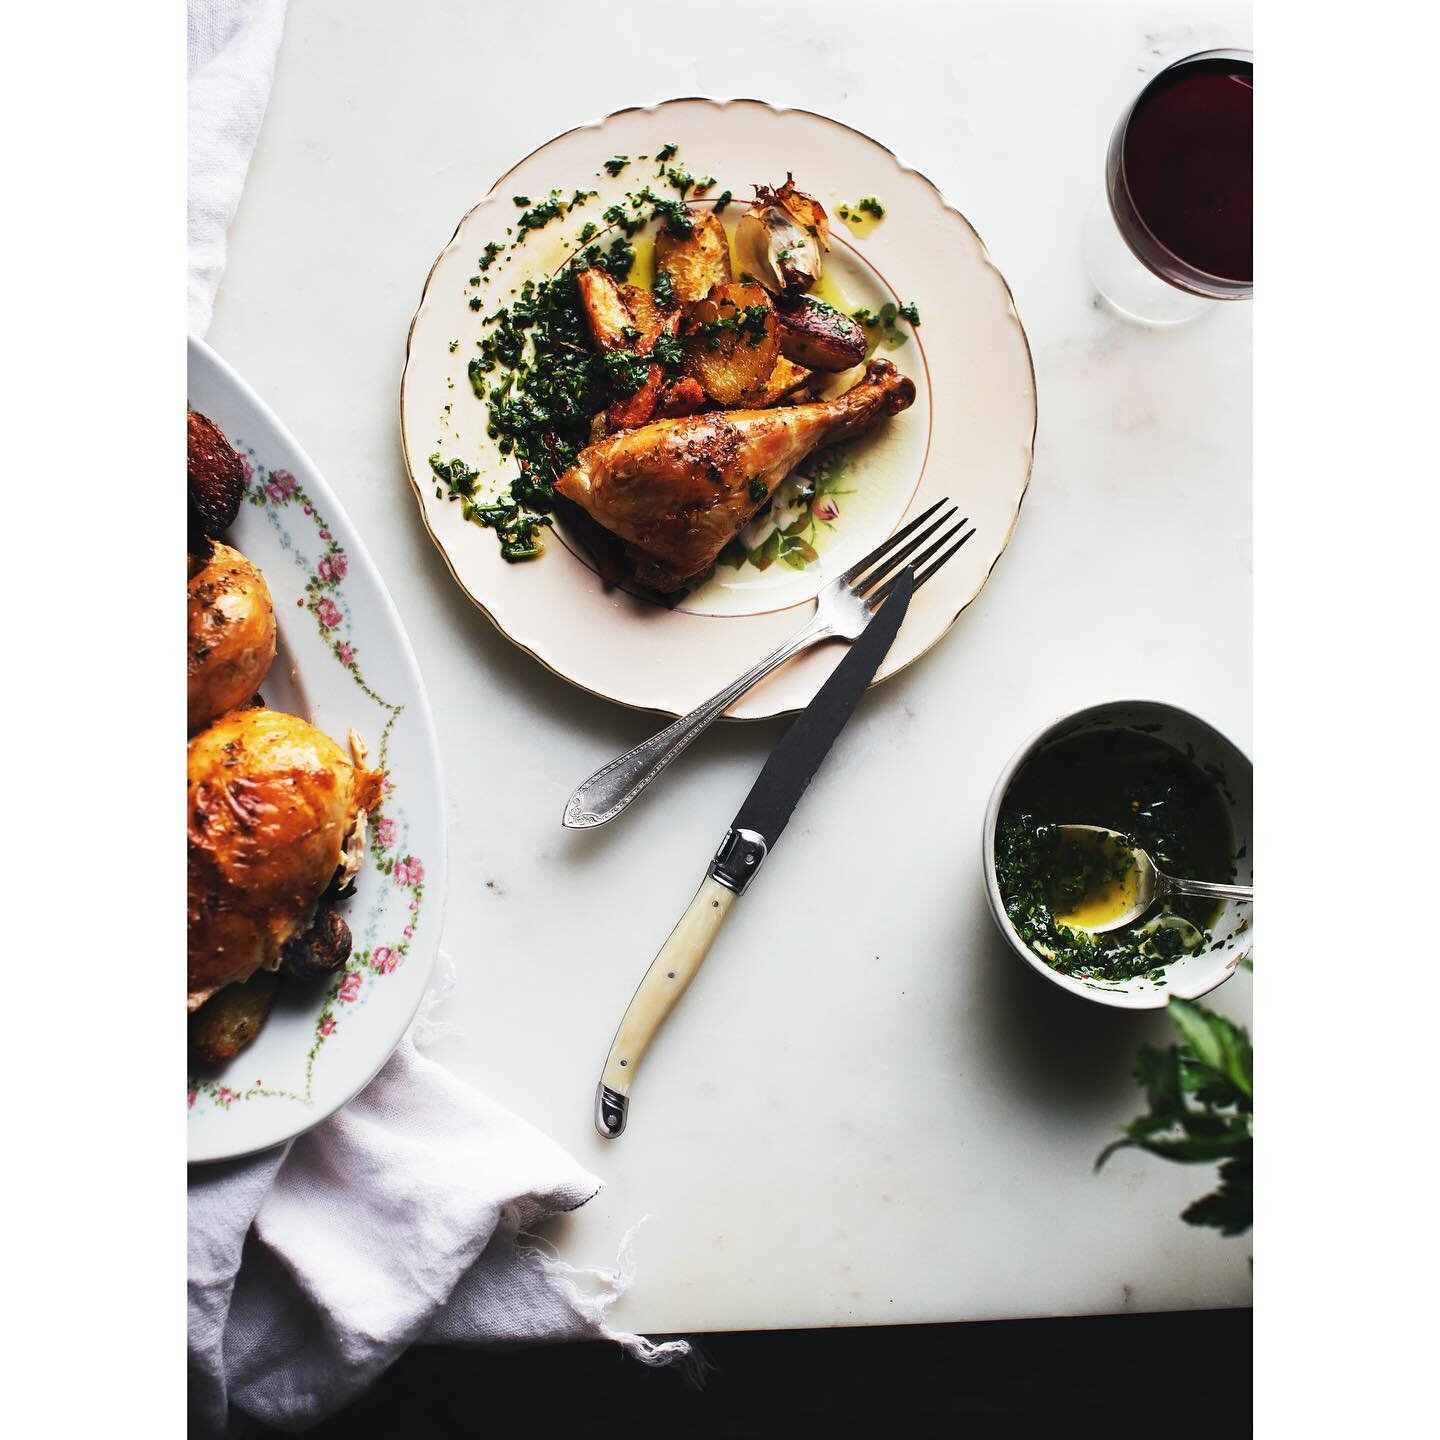 Day 80.
Roast chicken supper, with veg and salsa verde. 
:
This project is still ongoing, bumps and all. Posting when I can because life is FULL. Instead of posting the recipe here, I&rsquo;ve been working on a little newsletter with the recipe. Also